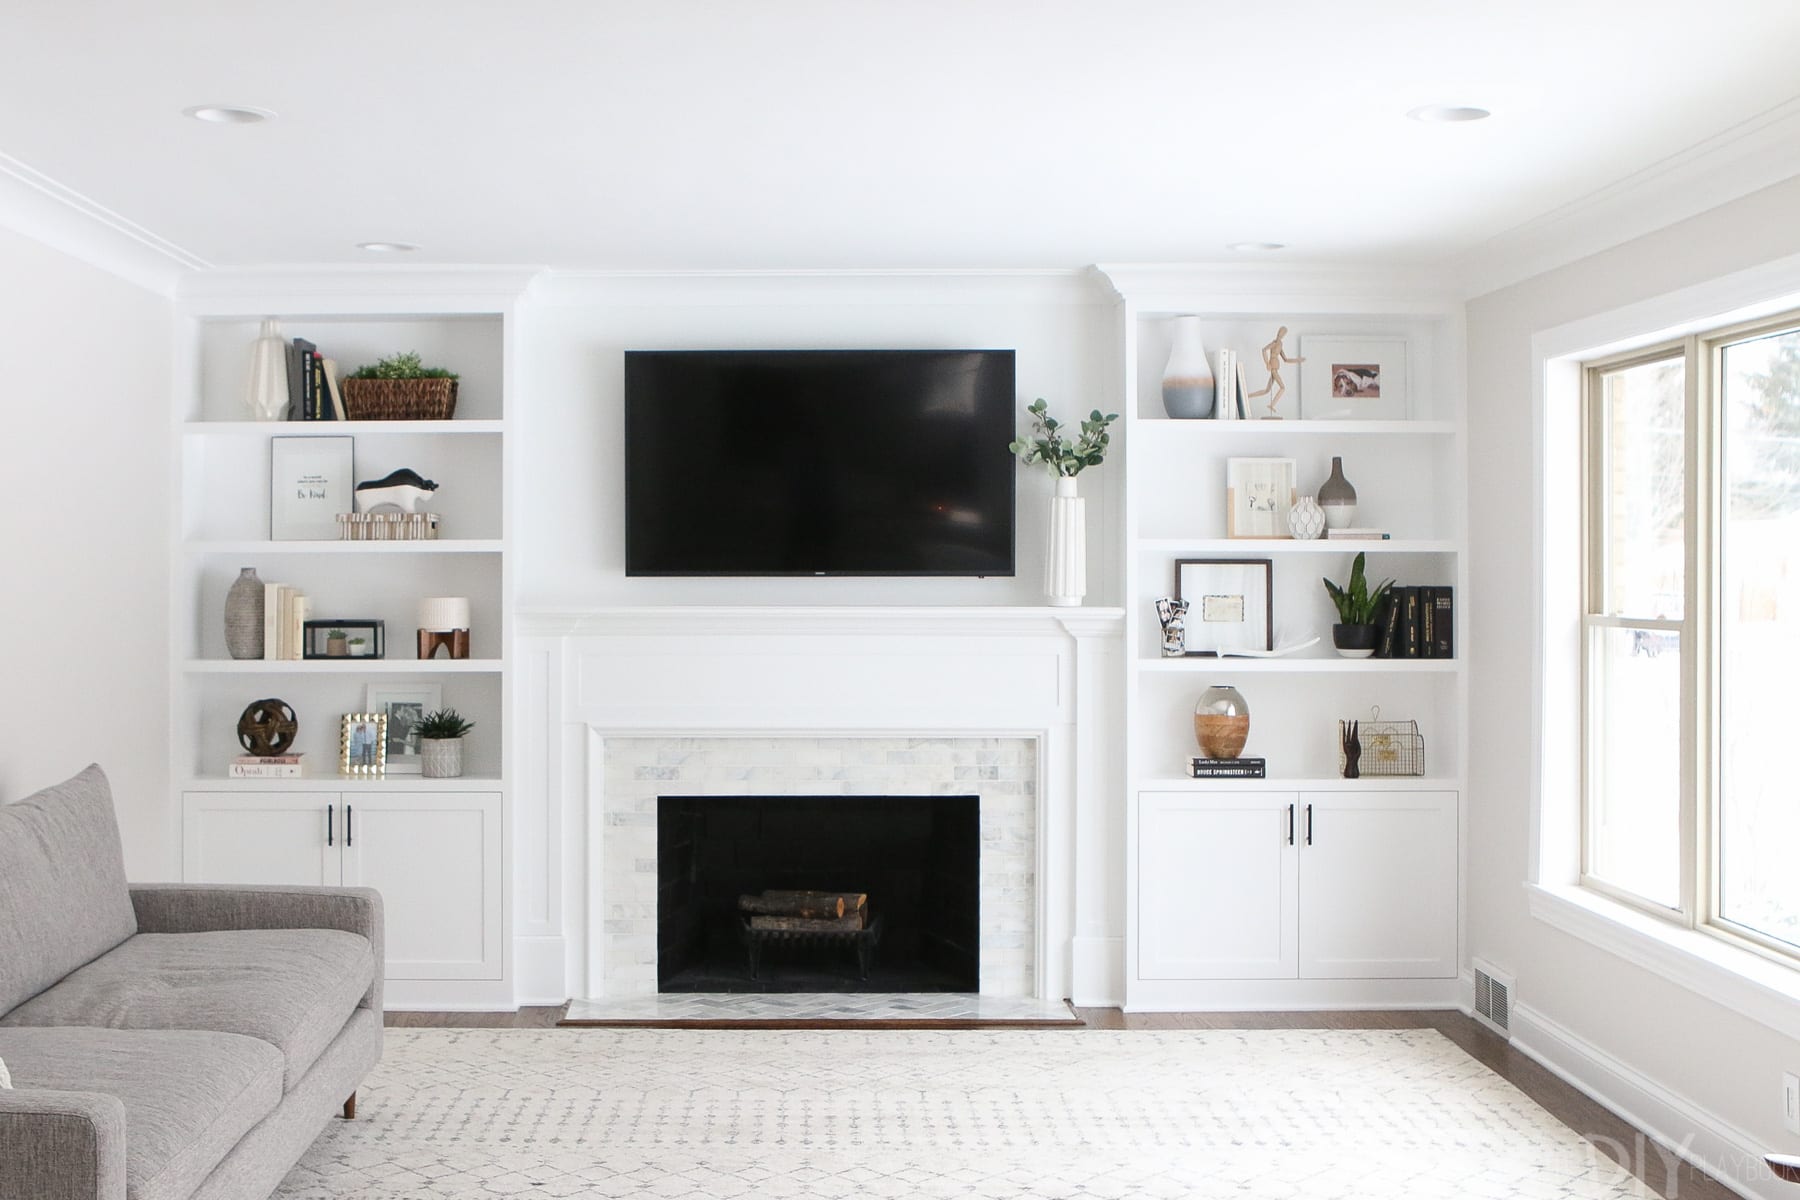 Decorating Shelves decorating built-in shelves can be difficult. read these tips to improve  your home YIPWVCJ